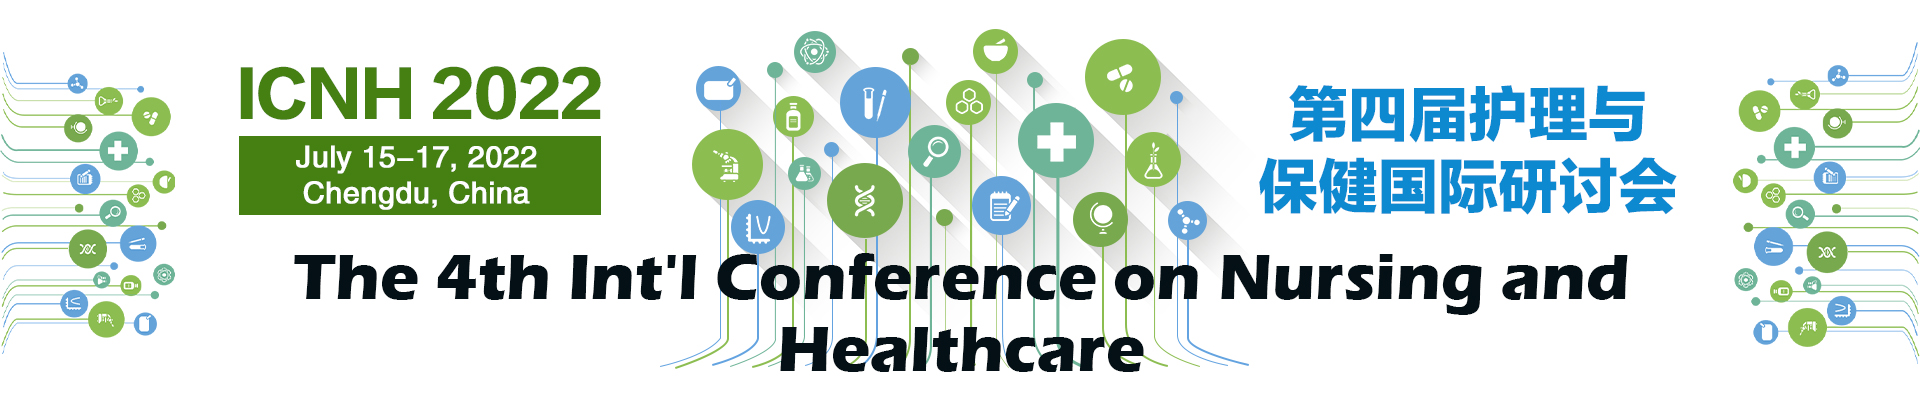 The 4th International Conference on Nursing and Healthcare (ICNH 2022), Online Event